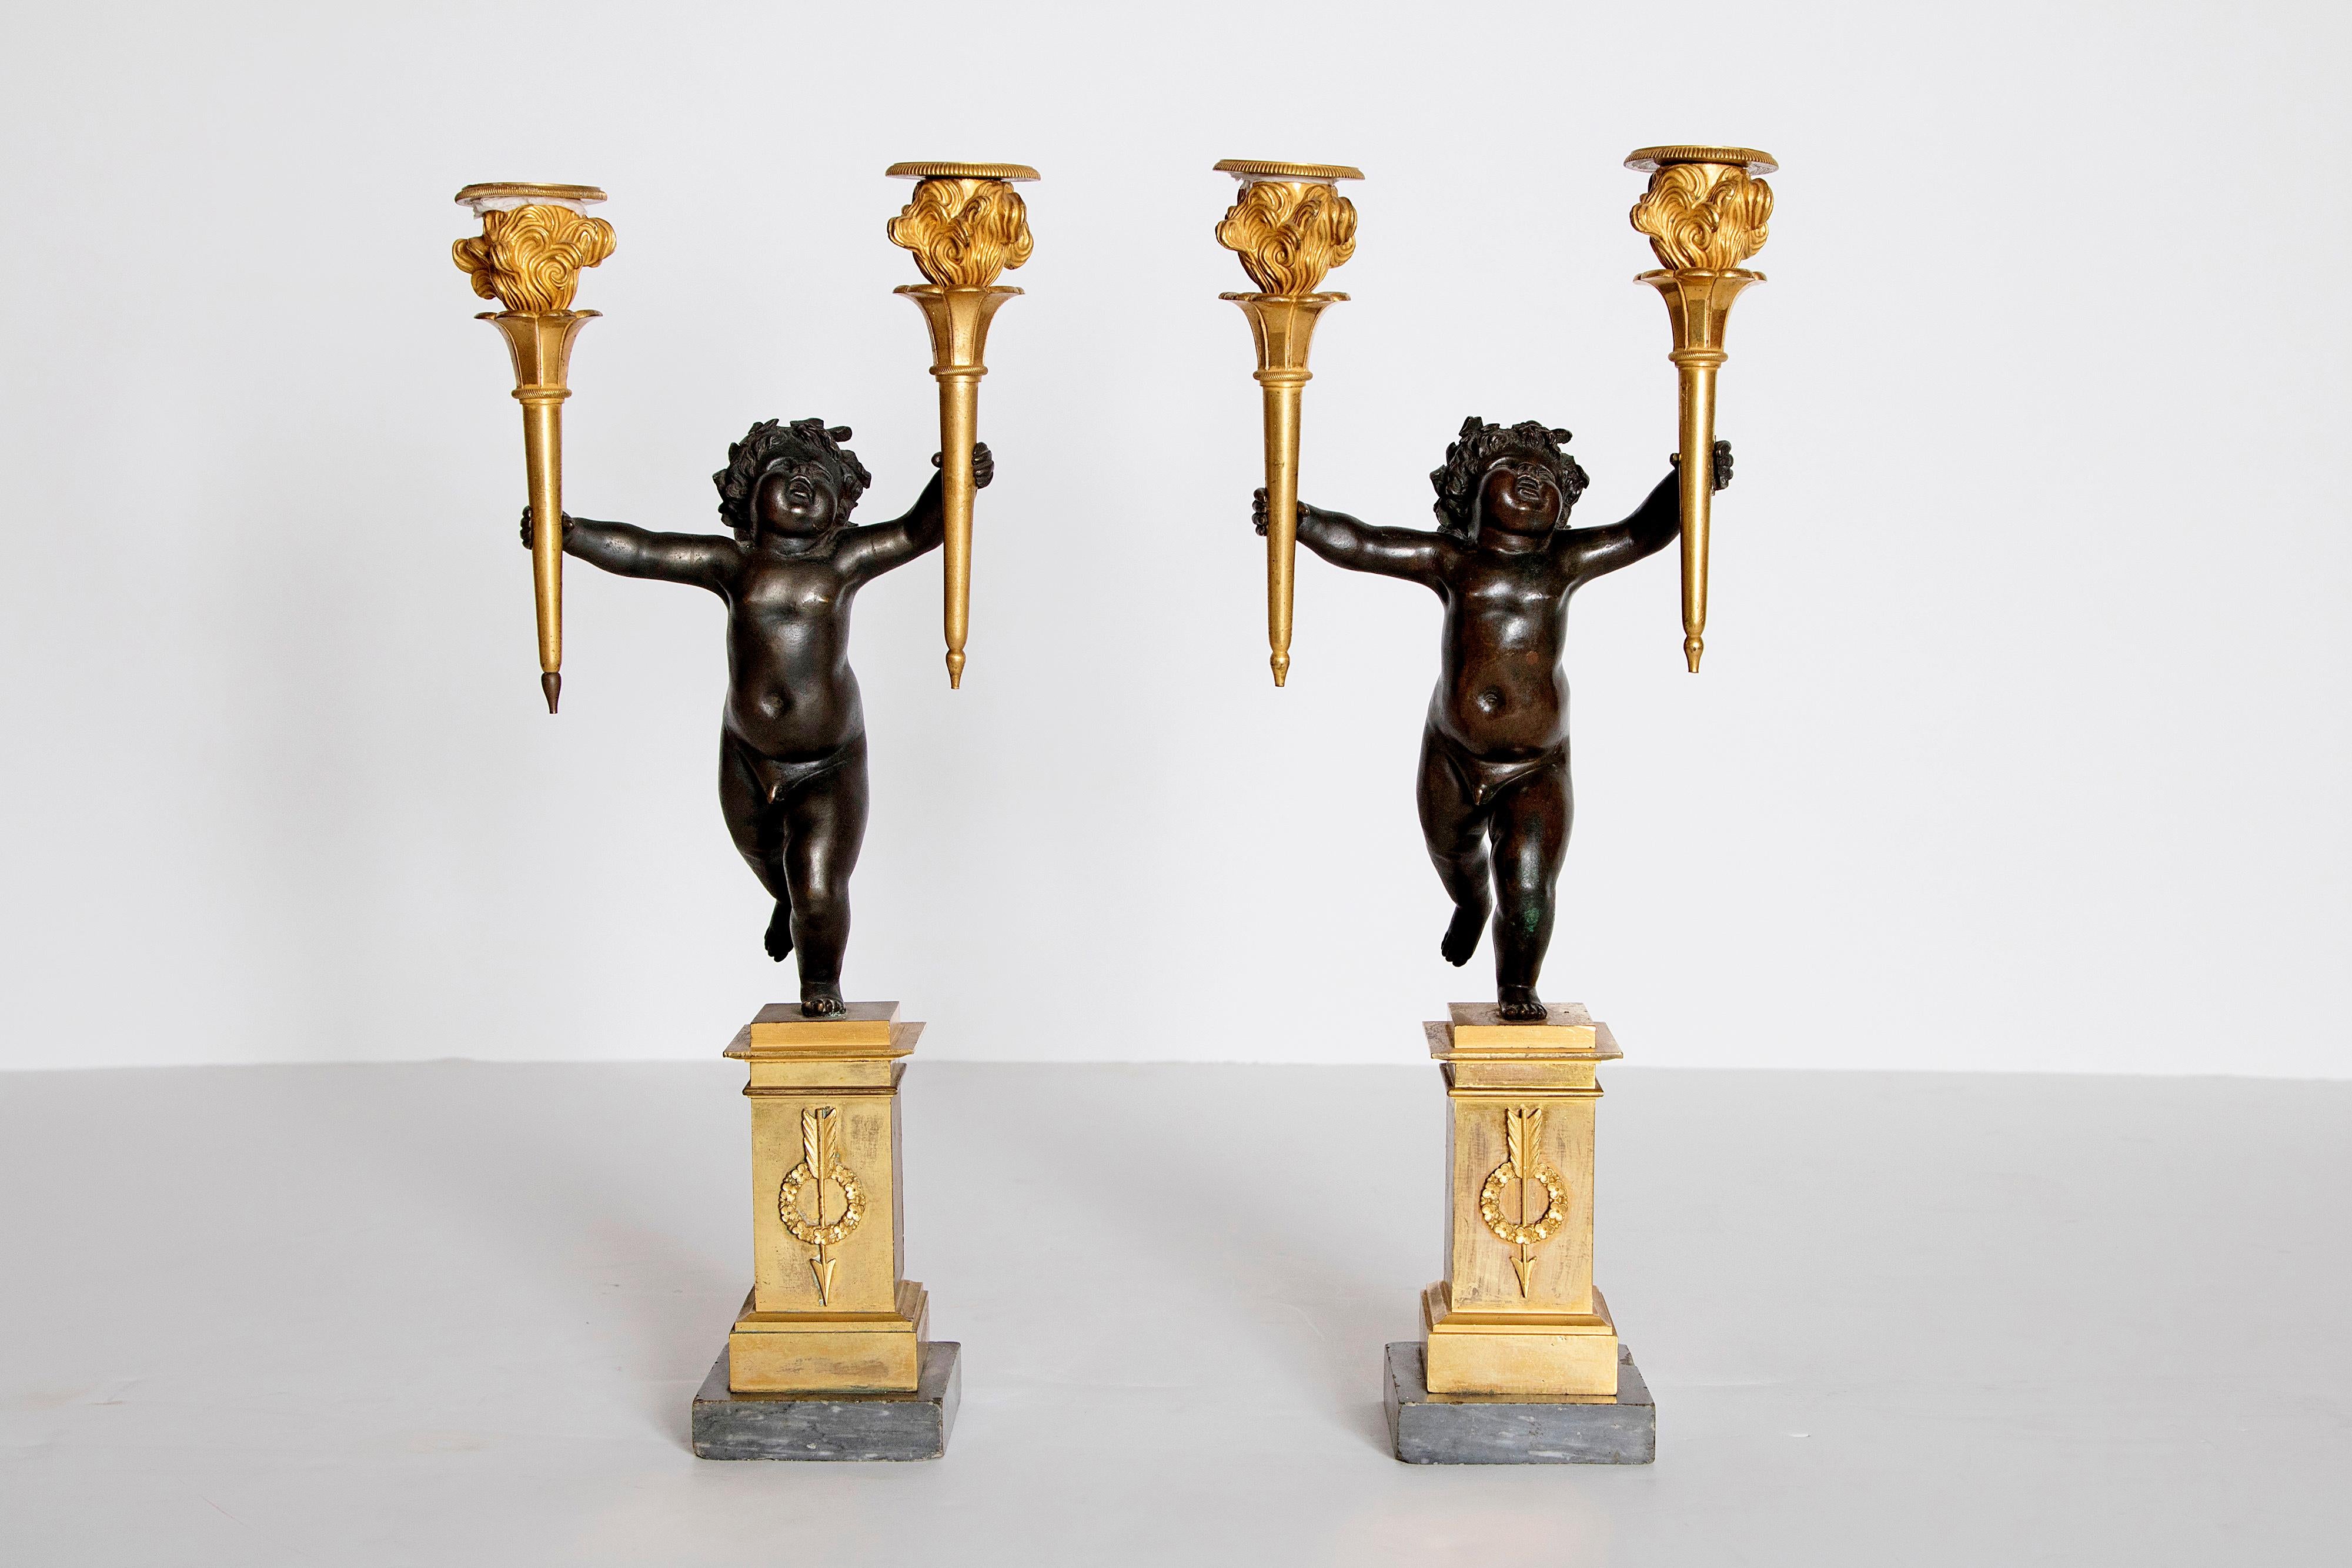 A fine pair of figurative candelabras in the form of a patinated bronze cherub running with a gilt torchiere in each hand. The cherubs stand on a gilded square pedestal base with an applied gilt wreath with an arrow. The cherubs separate from the